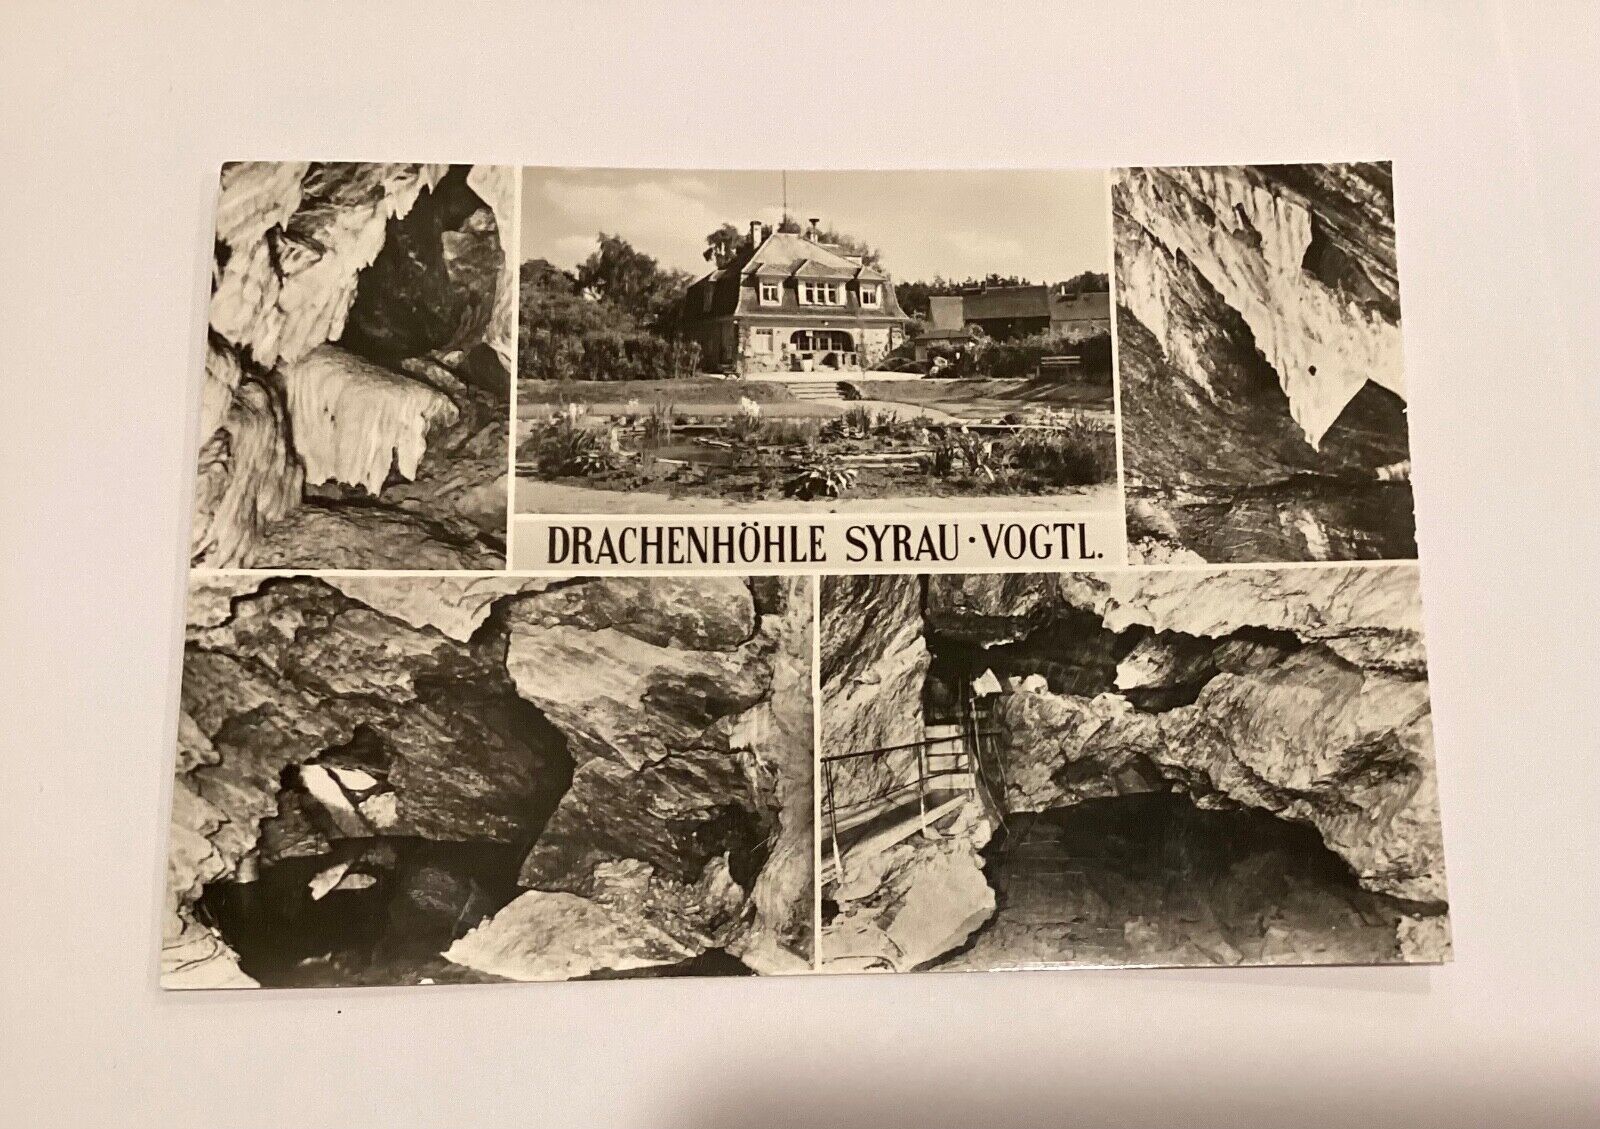 House And Views of The Dragon Cave In Syrau, Saxony, Germany Postcard C4